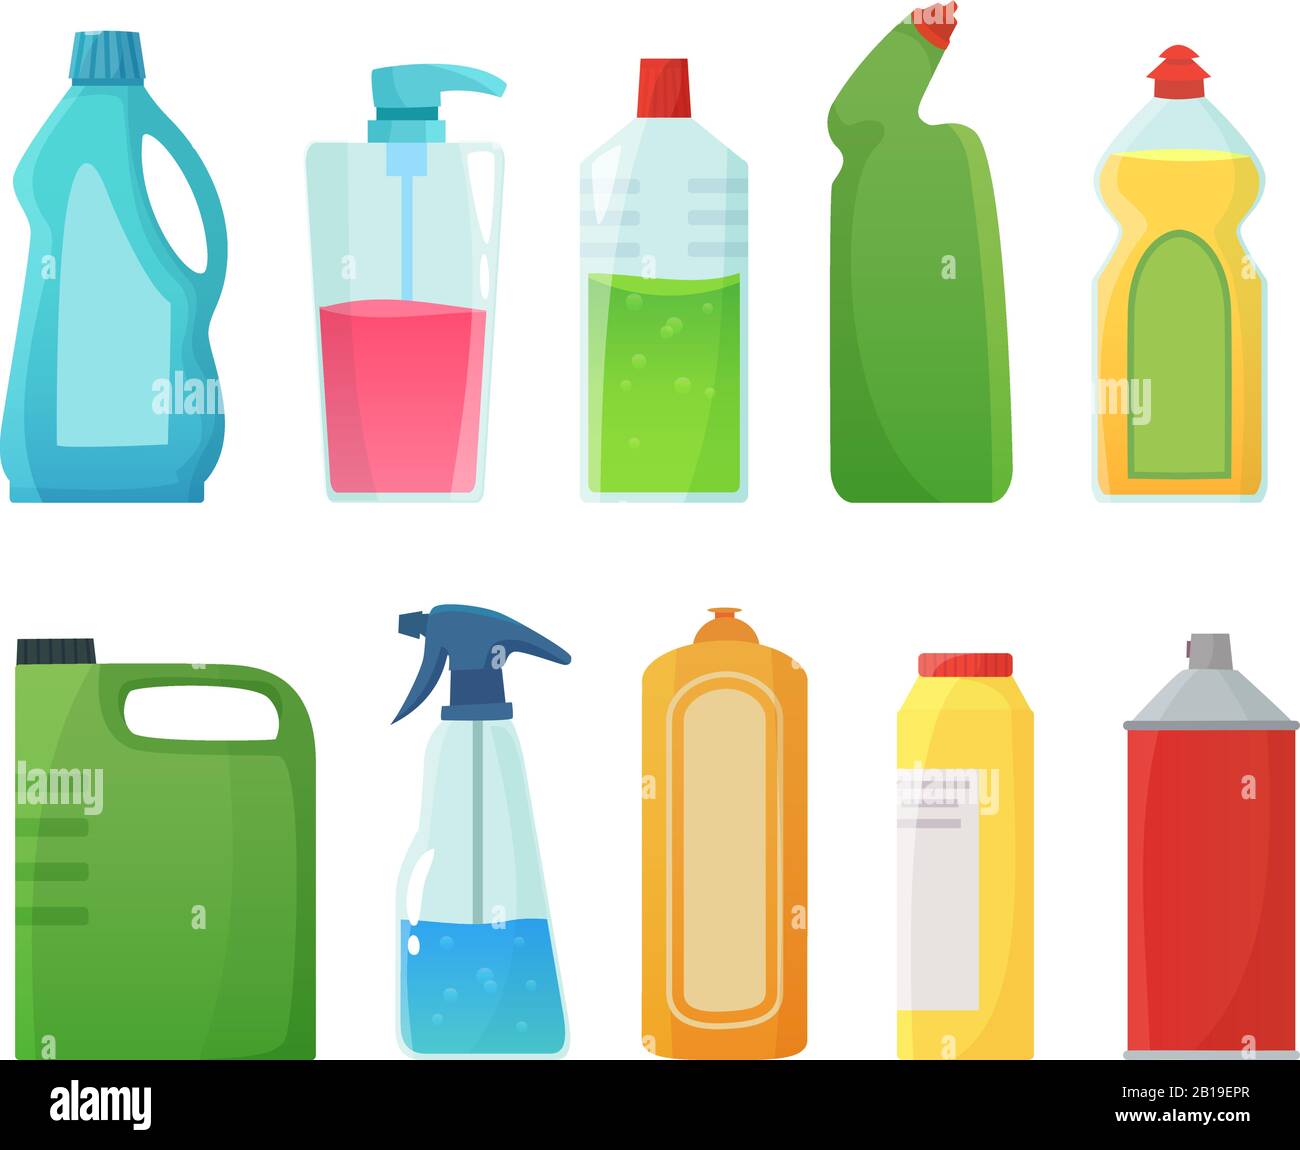 Detergent bottles. Cleaning supplies products, bleach bottle and plastic detergents containers cartoon vector illustration Stock Vector